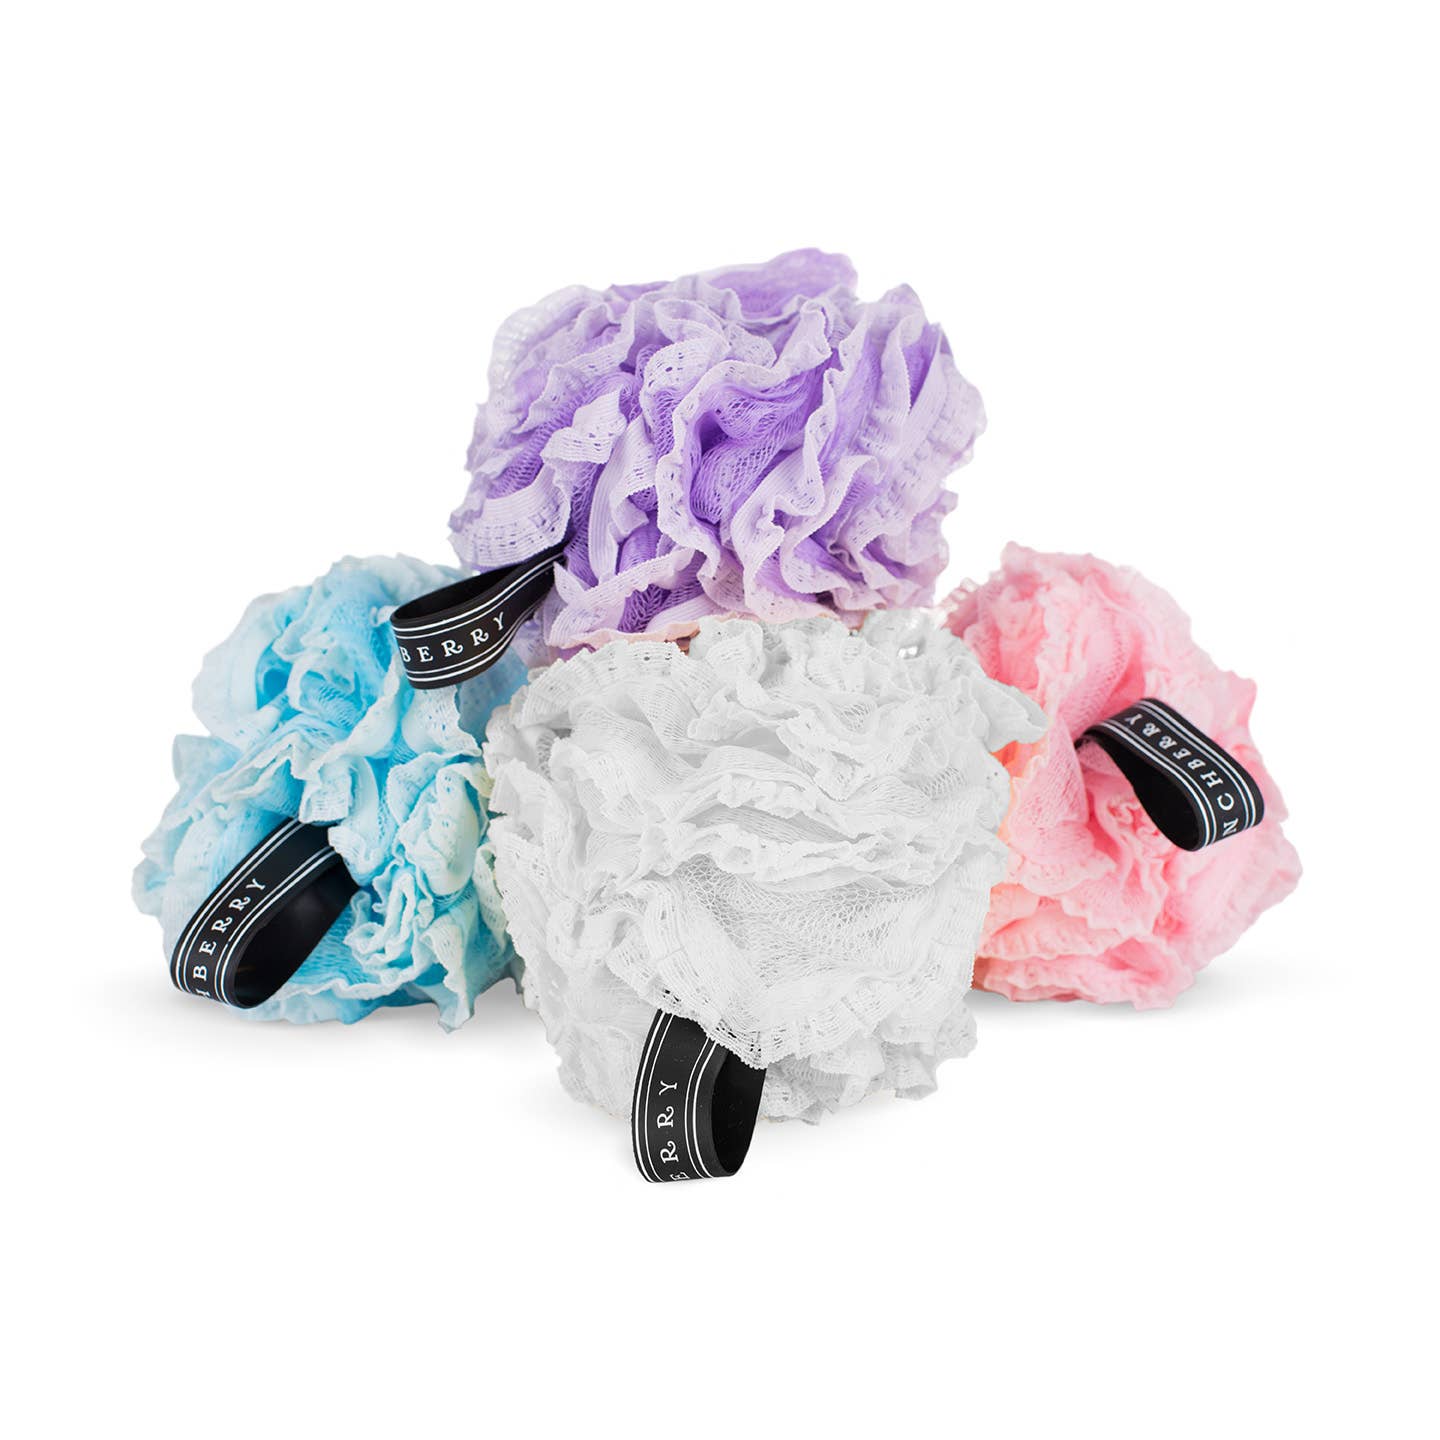 FinchBerry Lacy Loofahs - Pastel